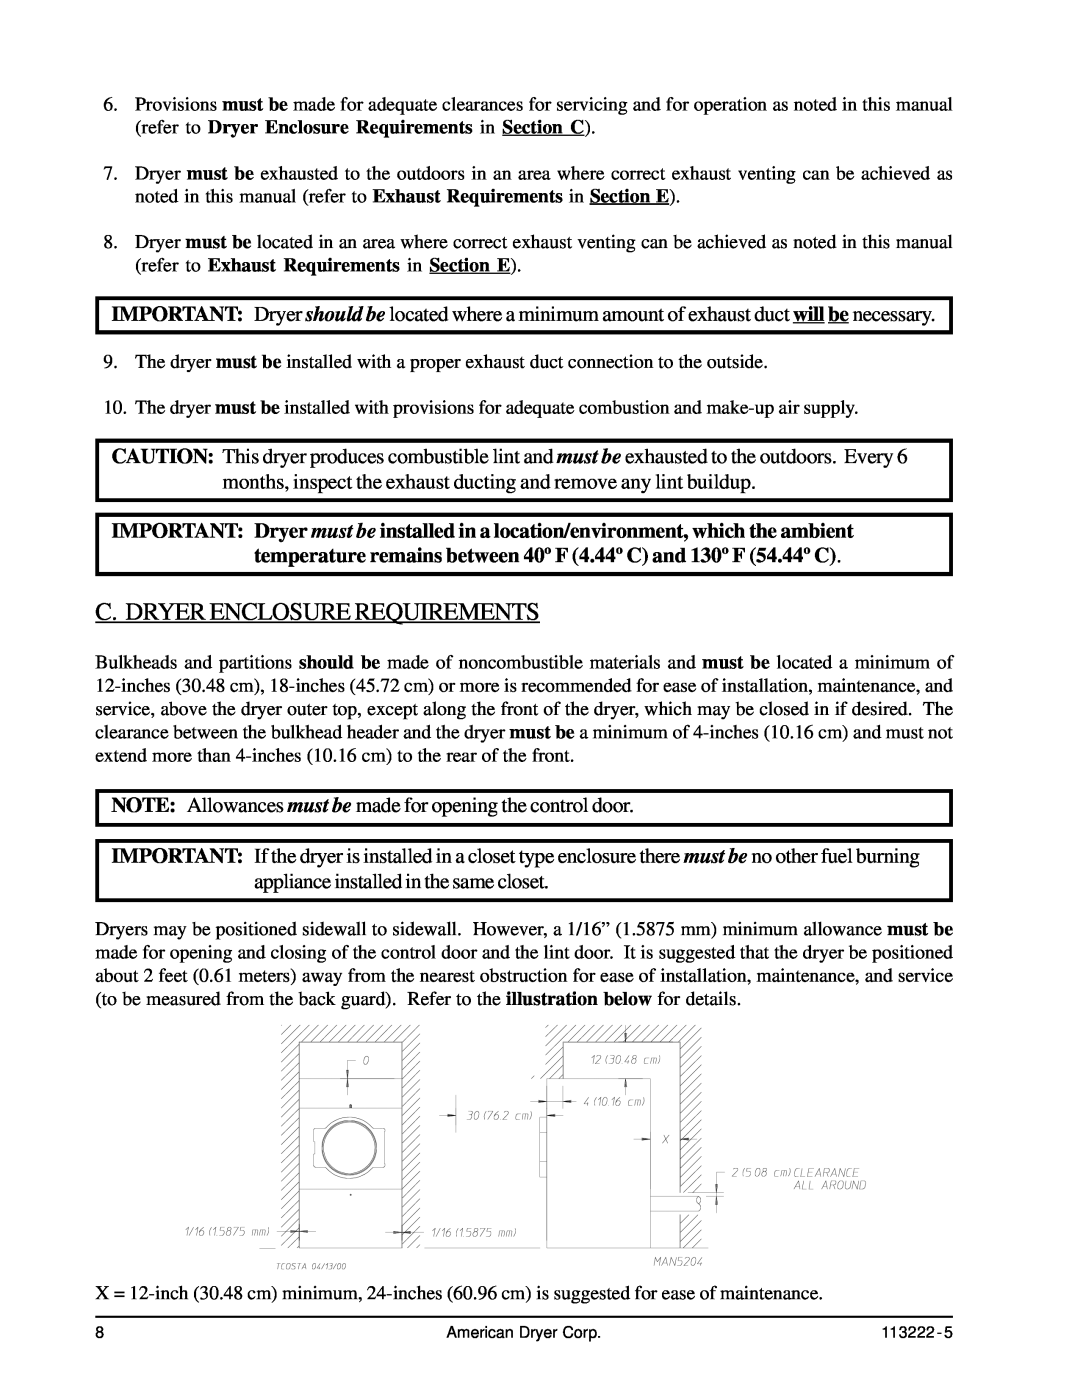 American Dryer Corp AD-24 Phase 7 installation manual C. Dryer Enclosure Requirements 